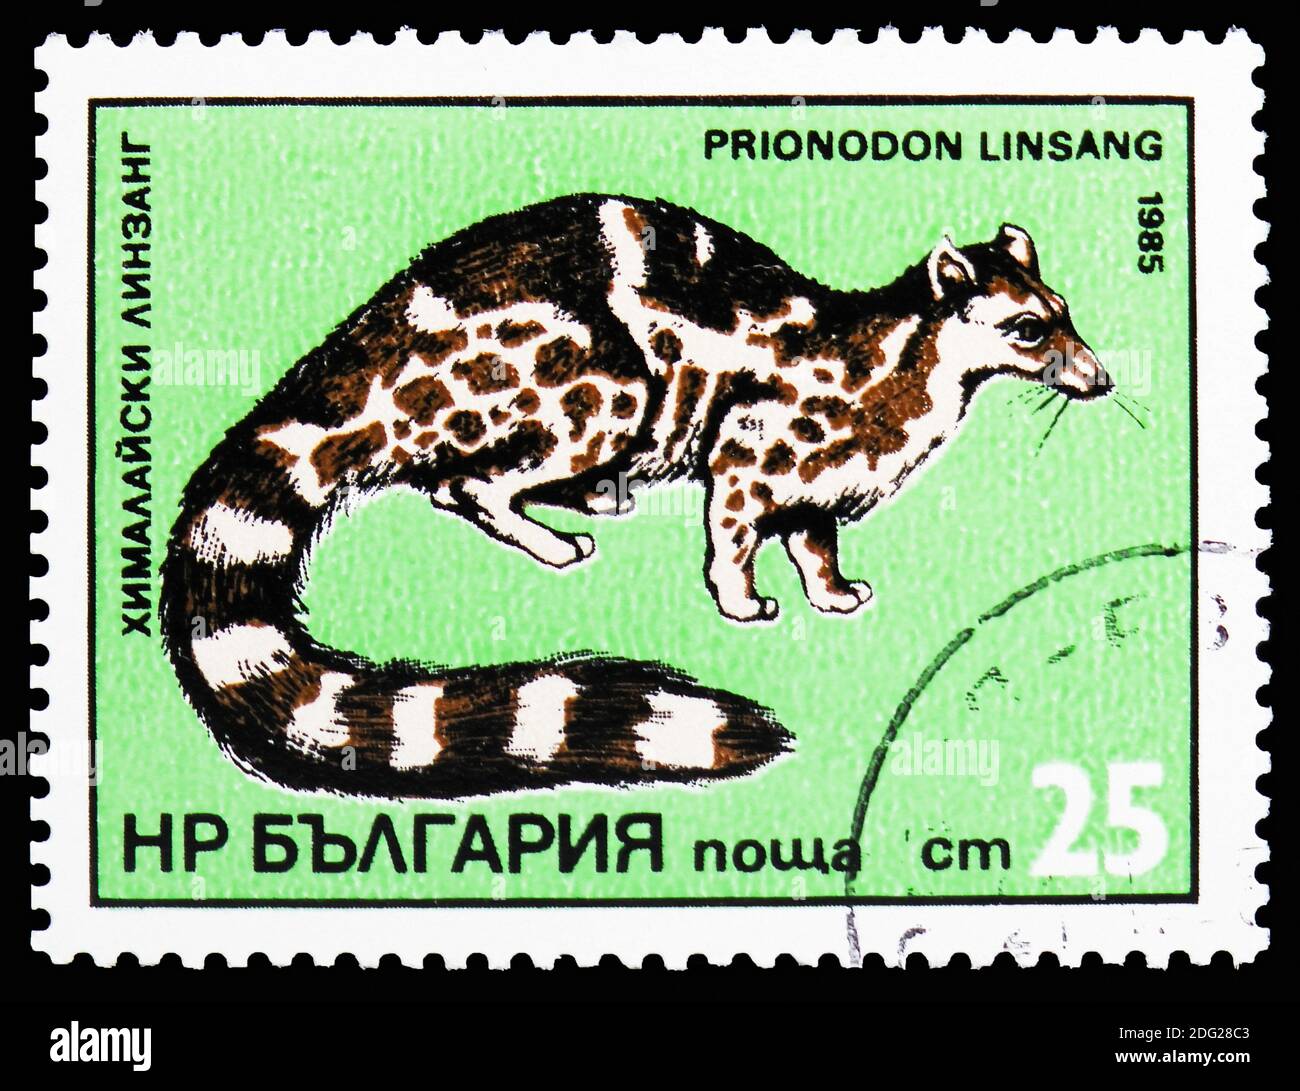 MOSCOW, RUSSIA - OCTOBER 21, 2018: A stamp printed in Bulgaria shows Banded Linsang (Prionodon linsang), Exotic predators serie, circa 1985 Stock Photo